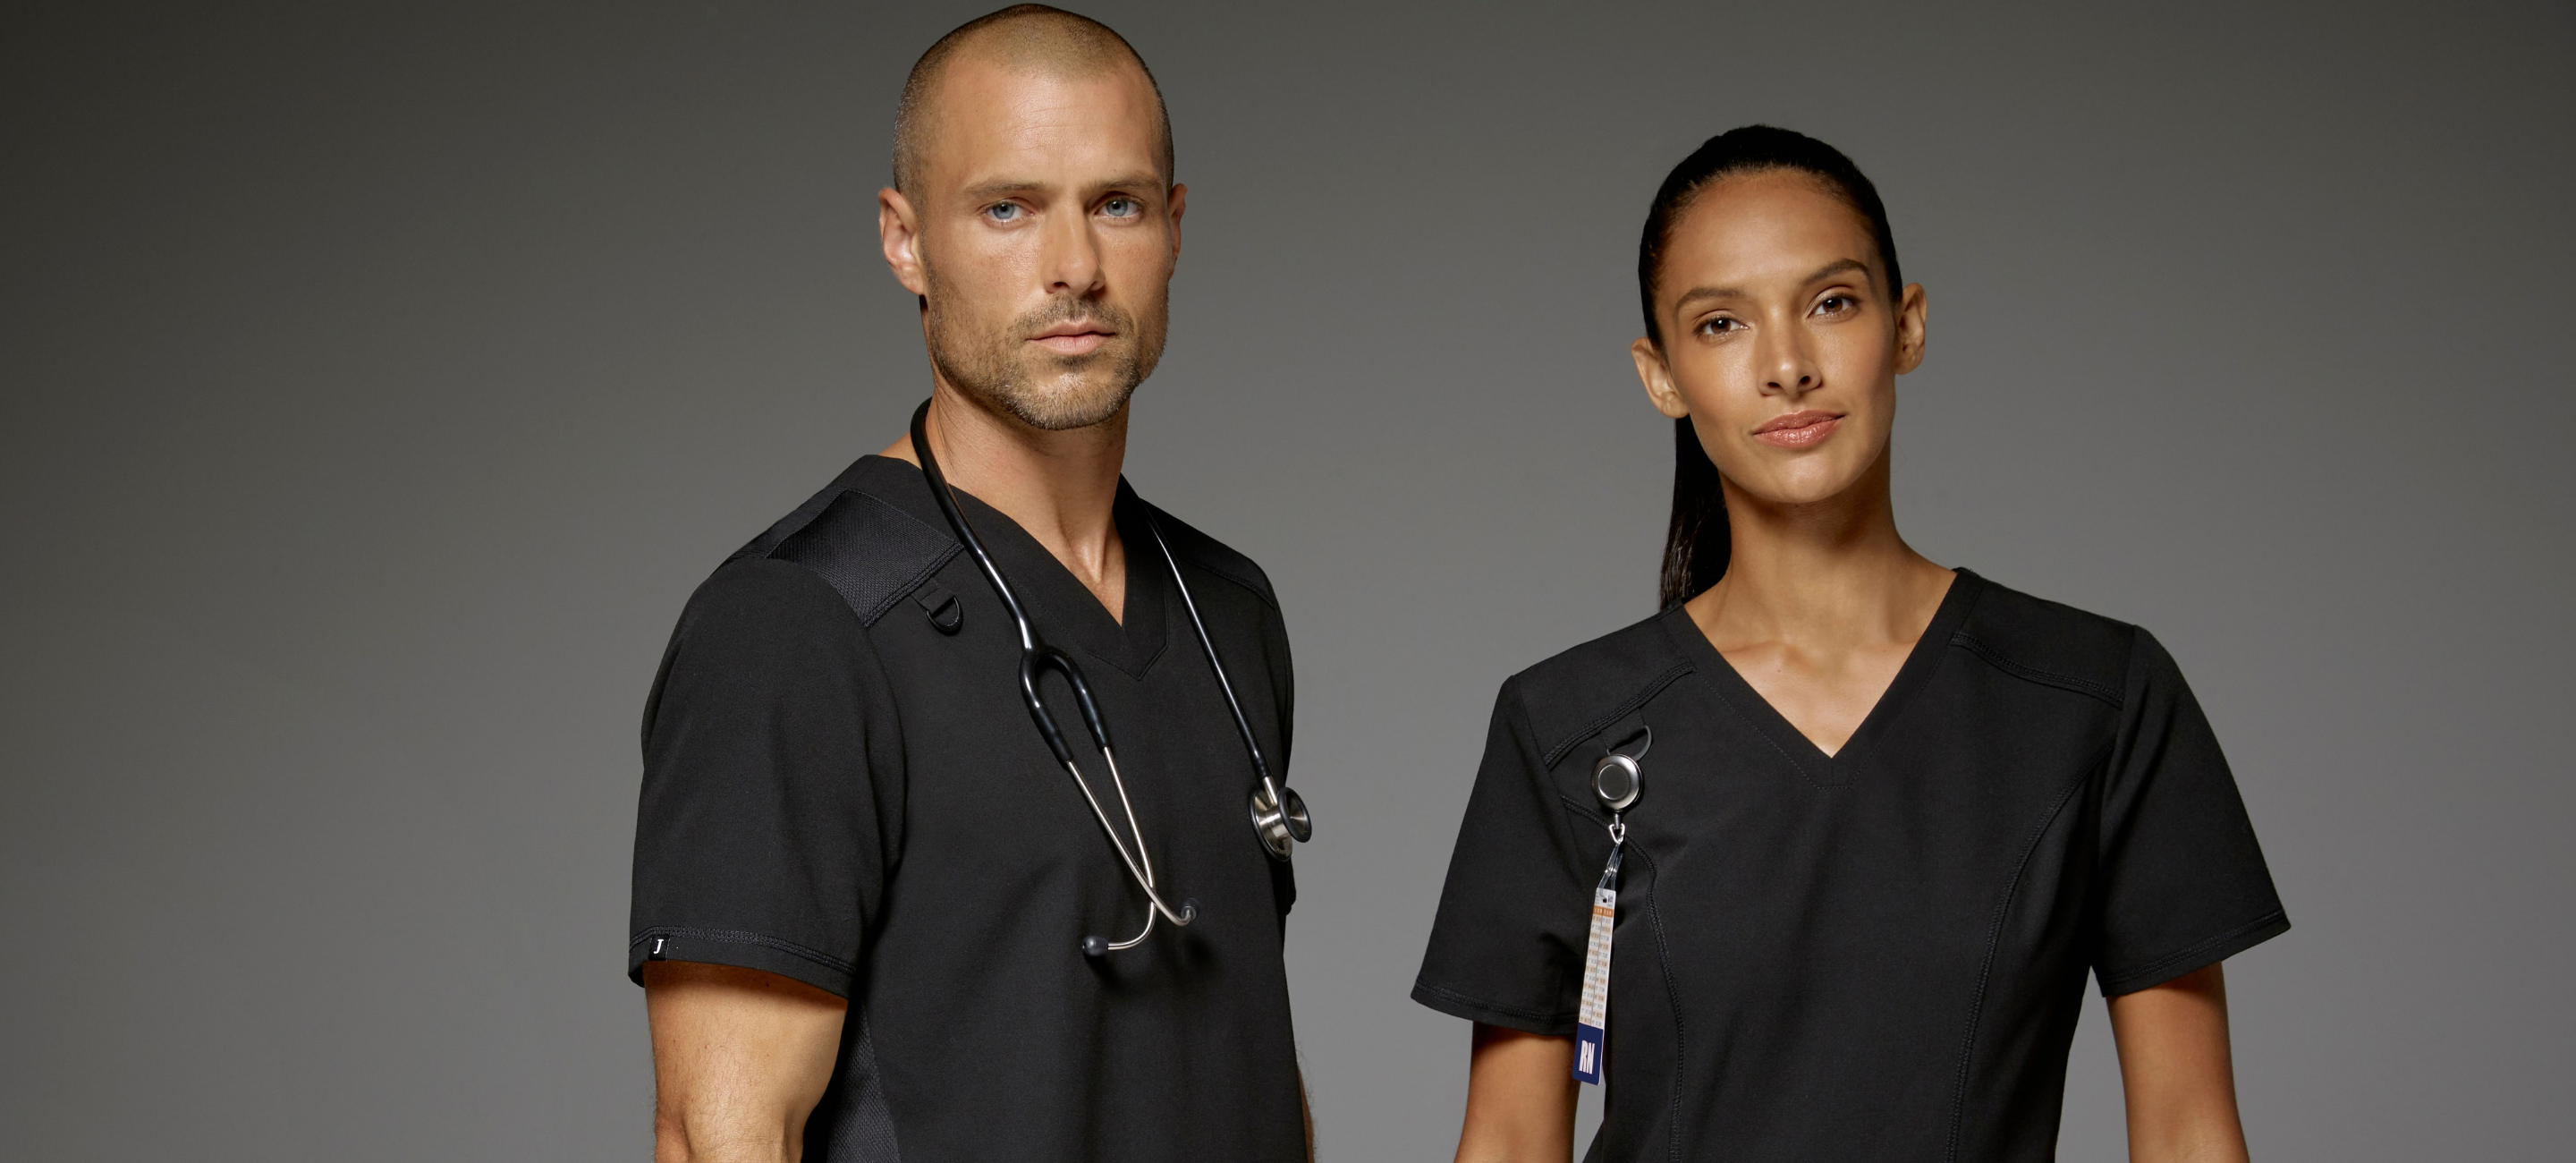 Medical Scrubs: What Are They, Who Wears Them and Why?